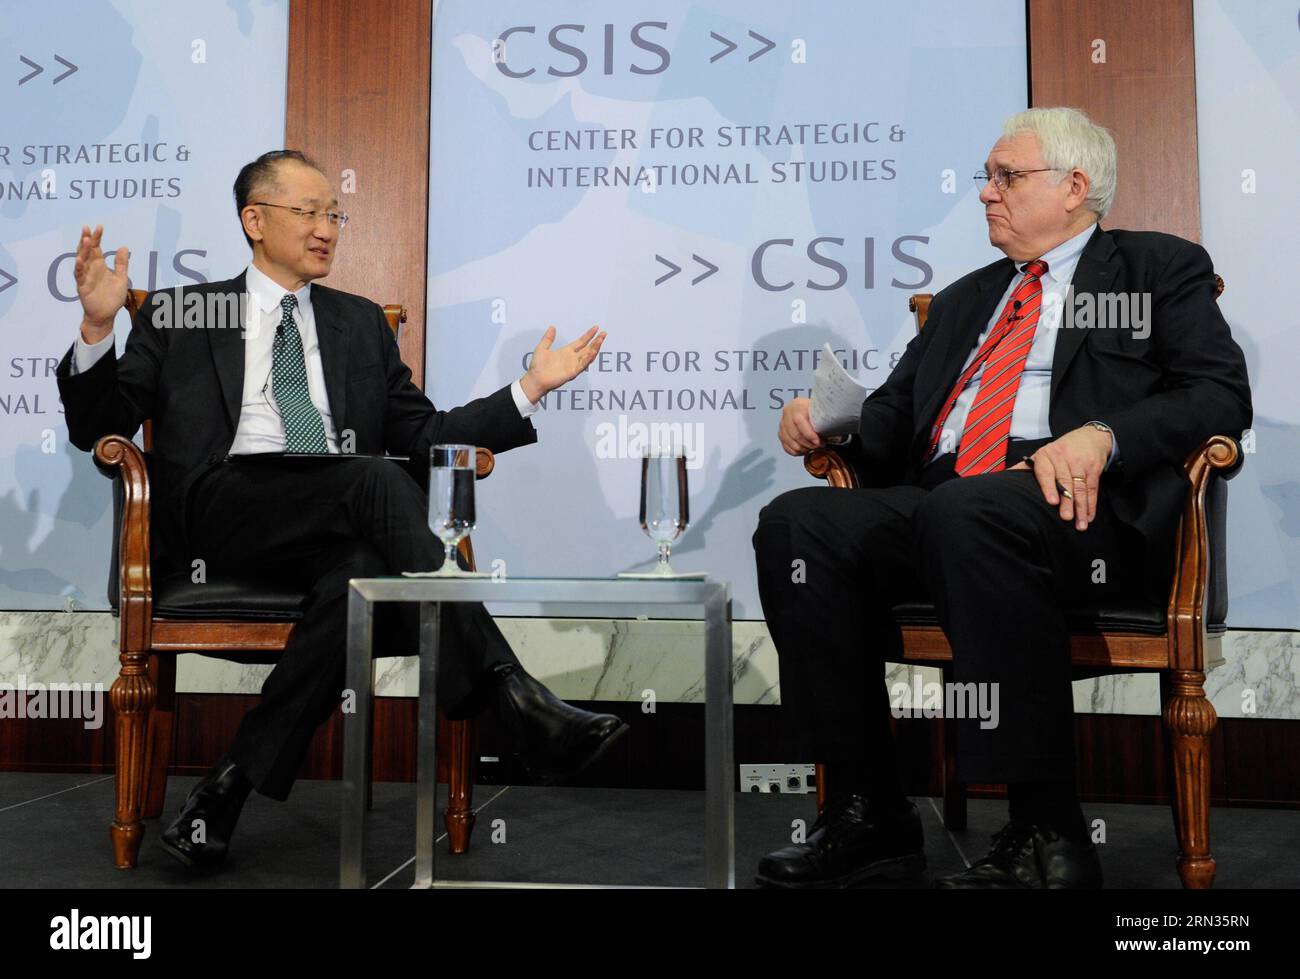 (150407) -- WASHINGTON D.C., April 7, 2015 -- World Bank President Jim Yong Kim (L) gives a public address at the Center for Strategic and International Studies (CSIS) in Washington D.C., capital of the United States, April 7, 2015. World Bank welcomes the new development banks, such as China-proposed Asian Infrastructure Investment Bank (AIIB) and the New Development Bank established by the BRICS countries, and is ready to share experience with them, World Bank President Jim Yong Kim said on Tuesday. ) U.S.-WASHINGTON D.C.-CSIS-WORLD BANK-PRESIDENT BaoxDandan PUBLICATIONxNOTxINxCHN   Washingt Stock Photo